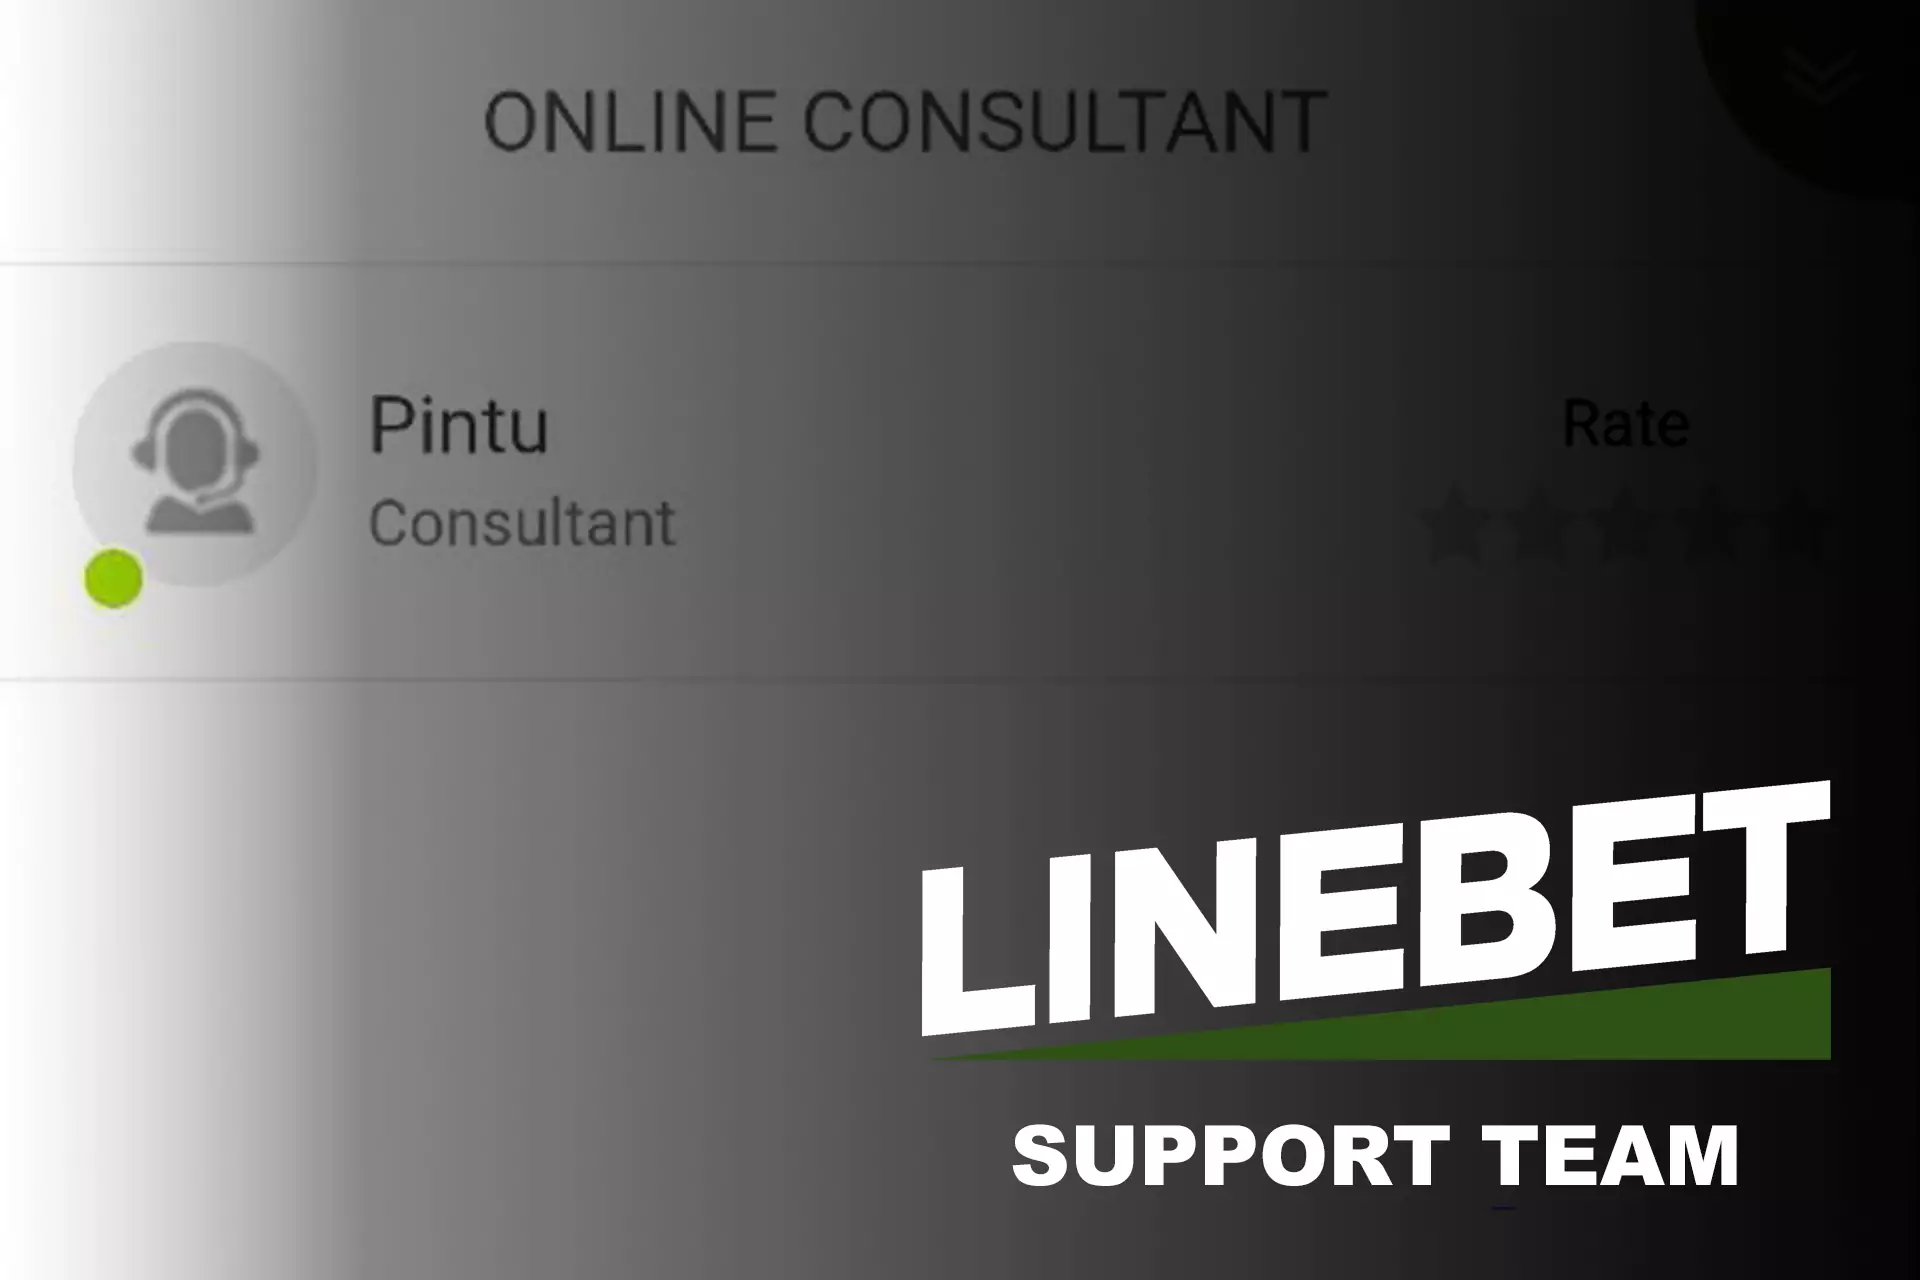 In case you have any questions, ask the Linebet support team.